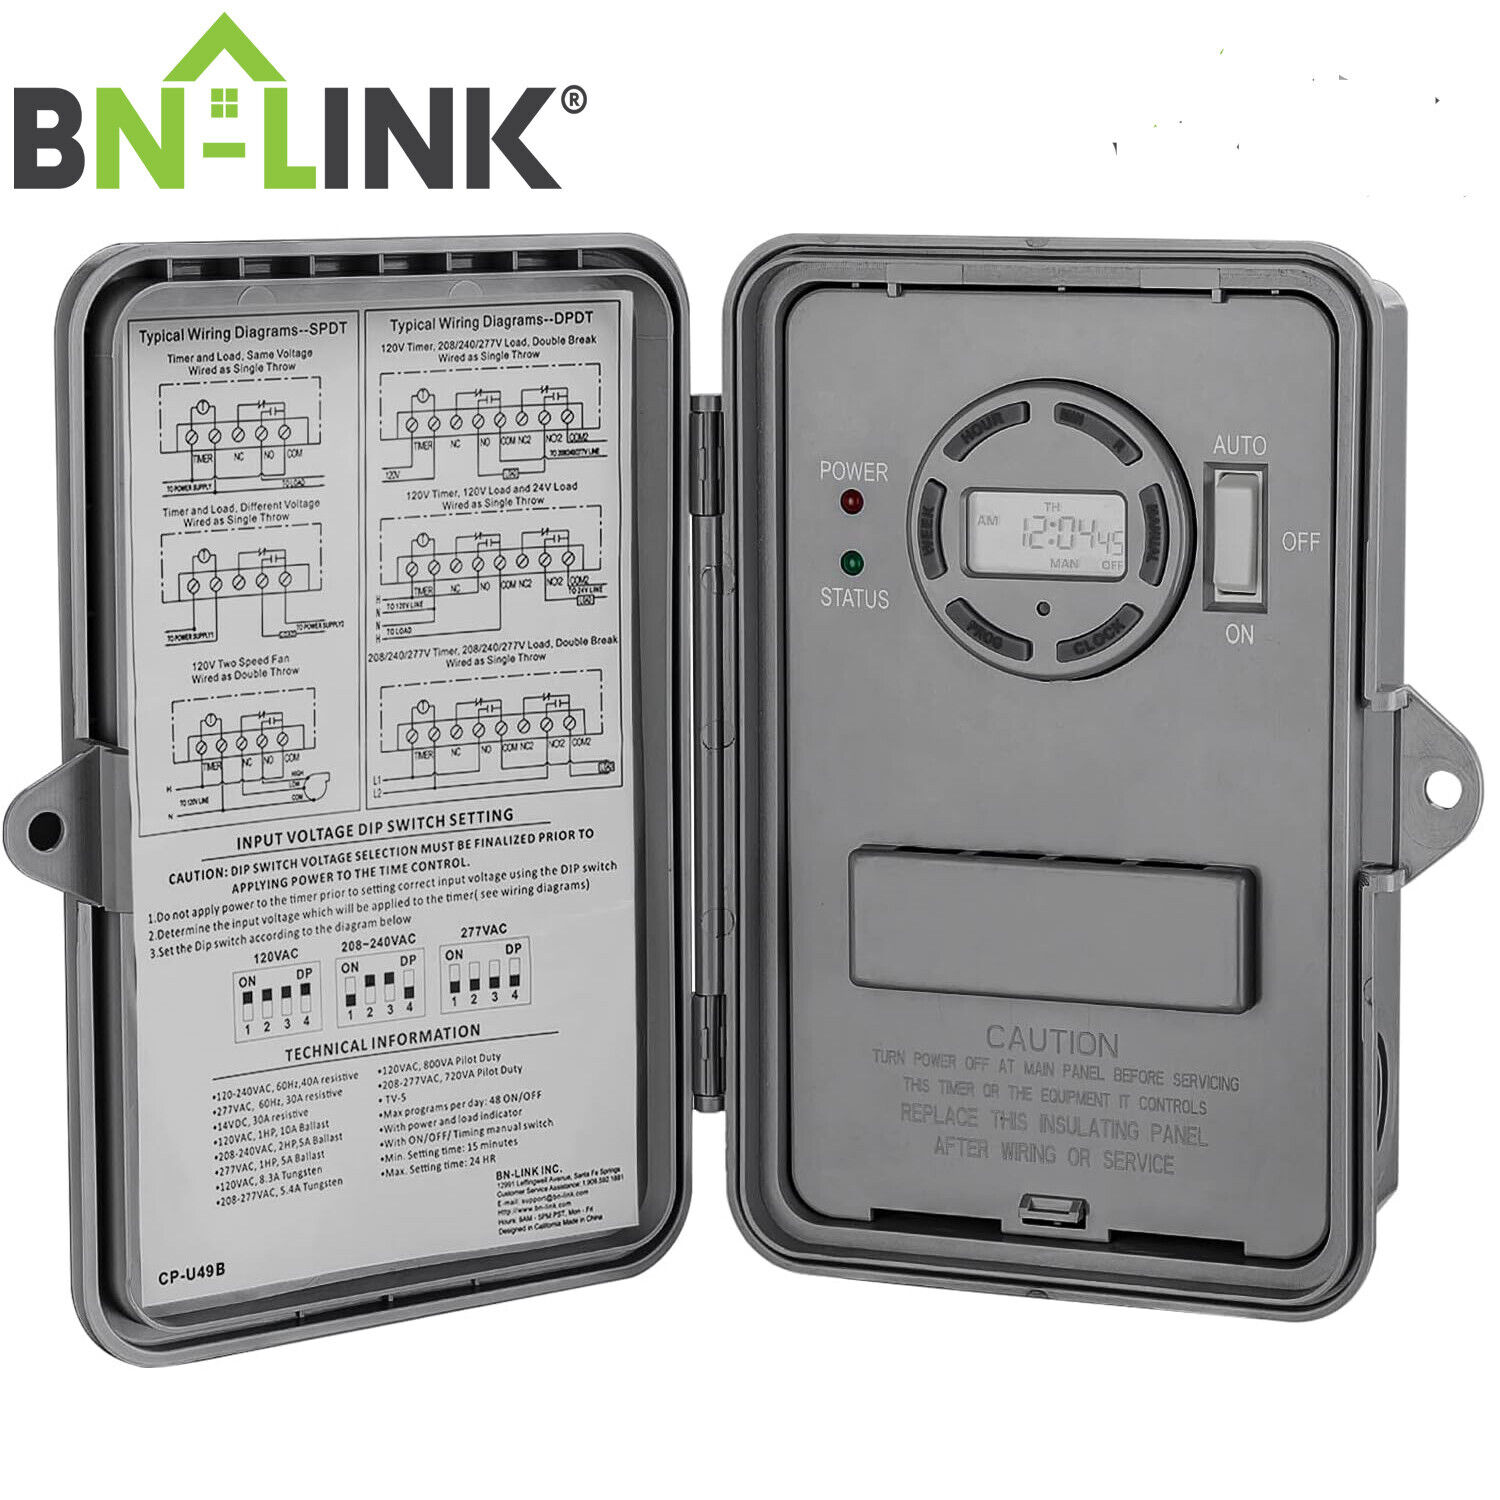 BN-LINK Pool Pump Timer, Outdoor Digital Timer Box Heavy Duty 7-Day Programmable